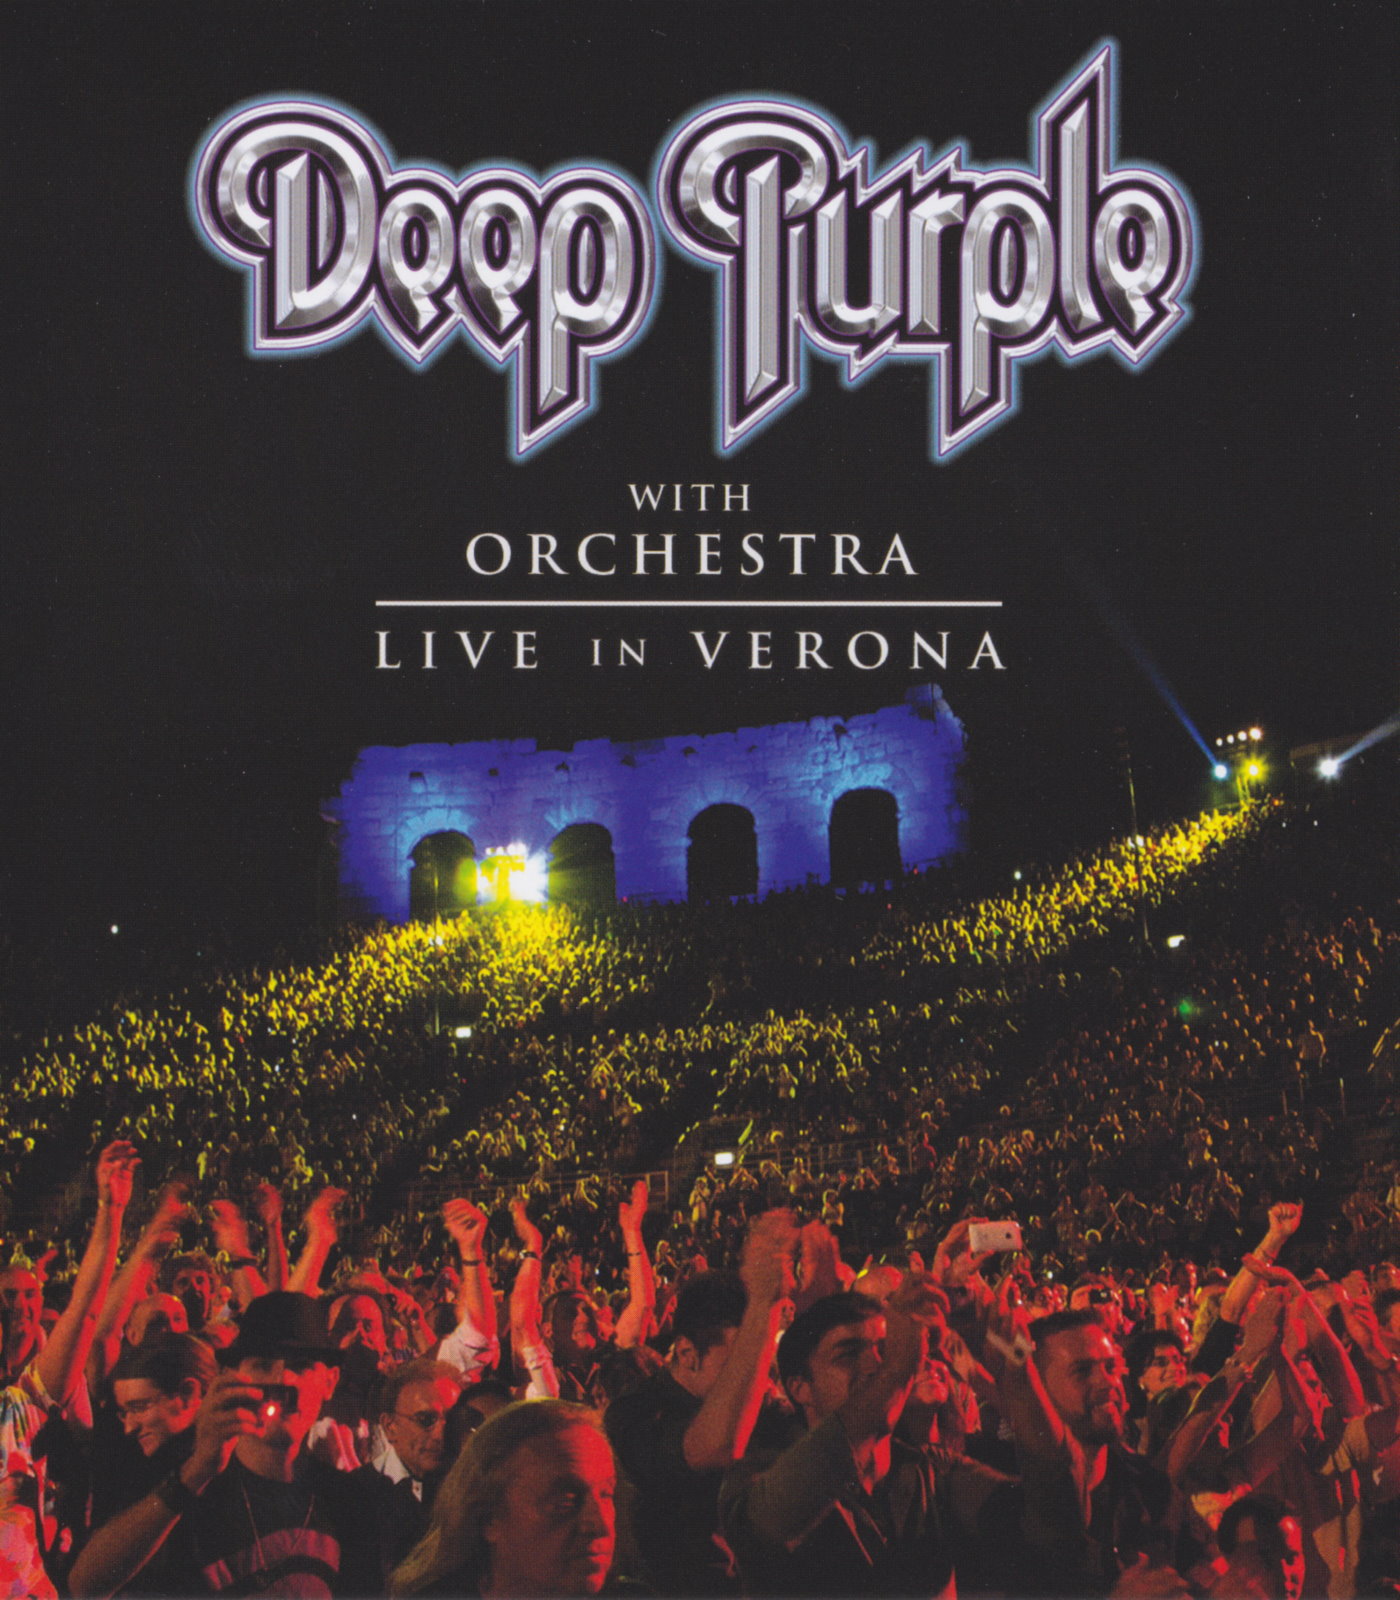 Cover - Deep Purple with Orchestra Live in Verona.jpg